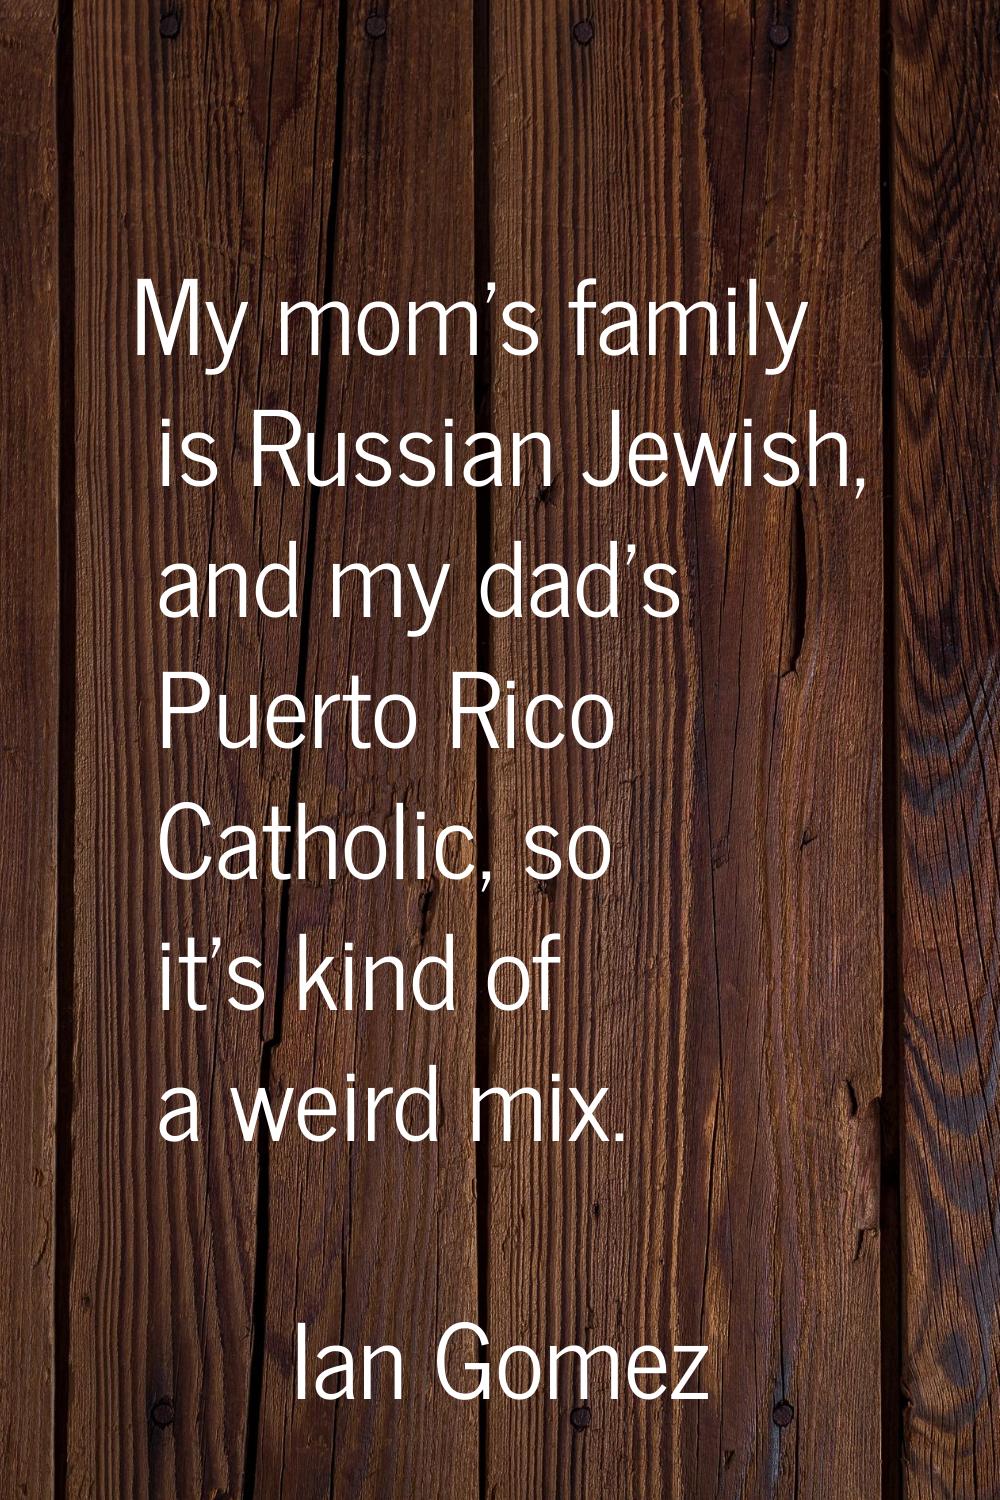 My mom's family is Russian Jewish, and my dad's Puerto Rico Catholic, so it's kind of a weird mix.